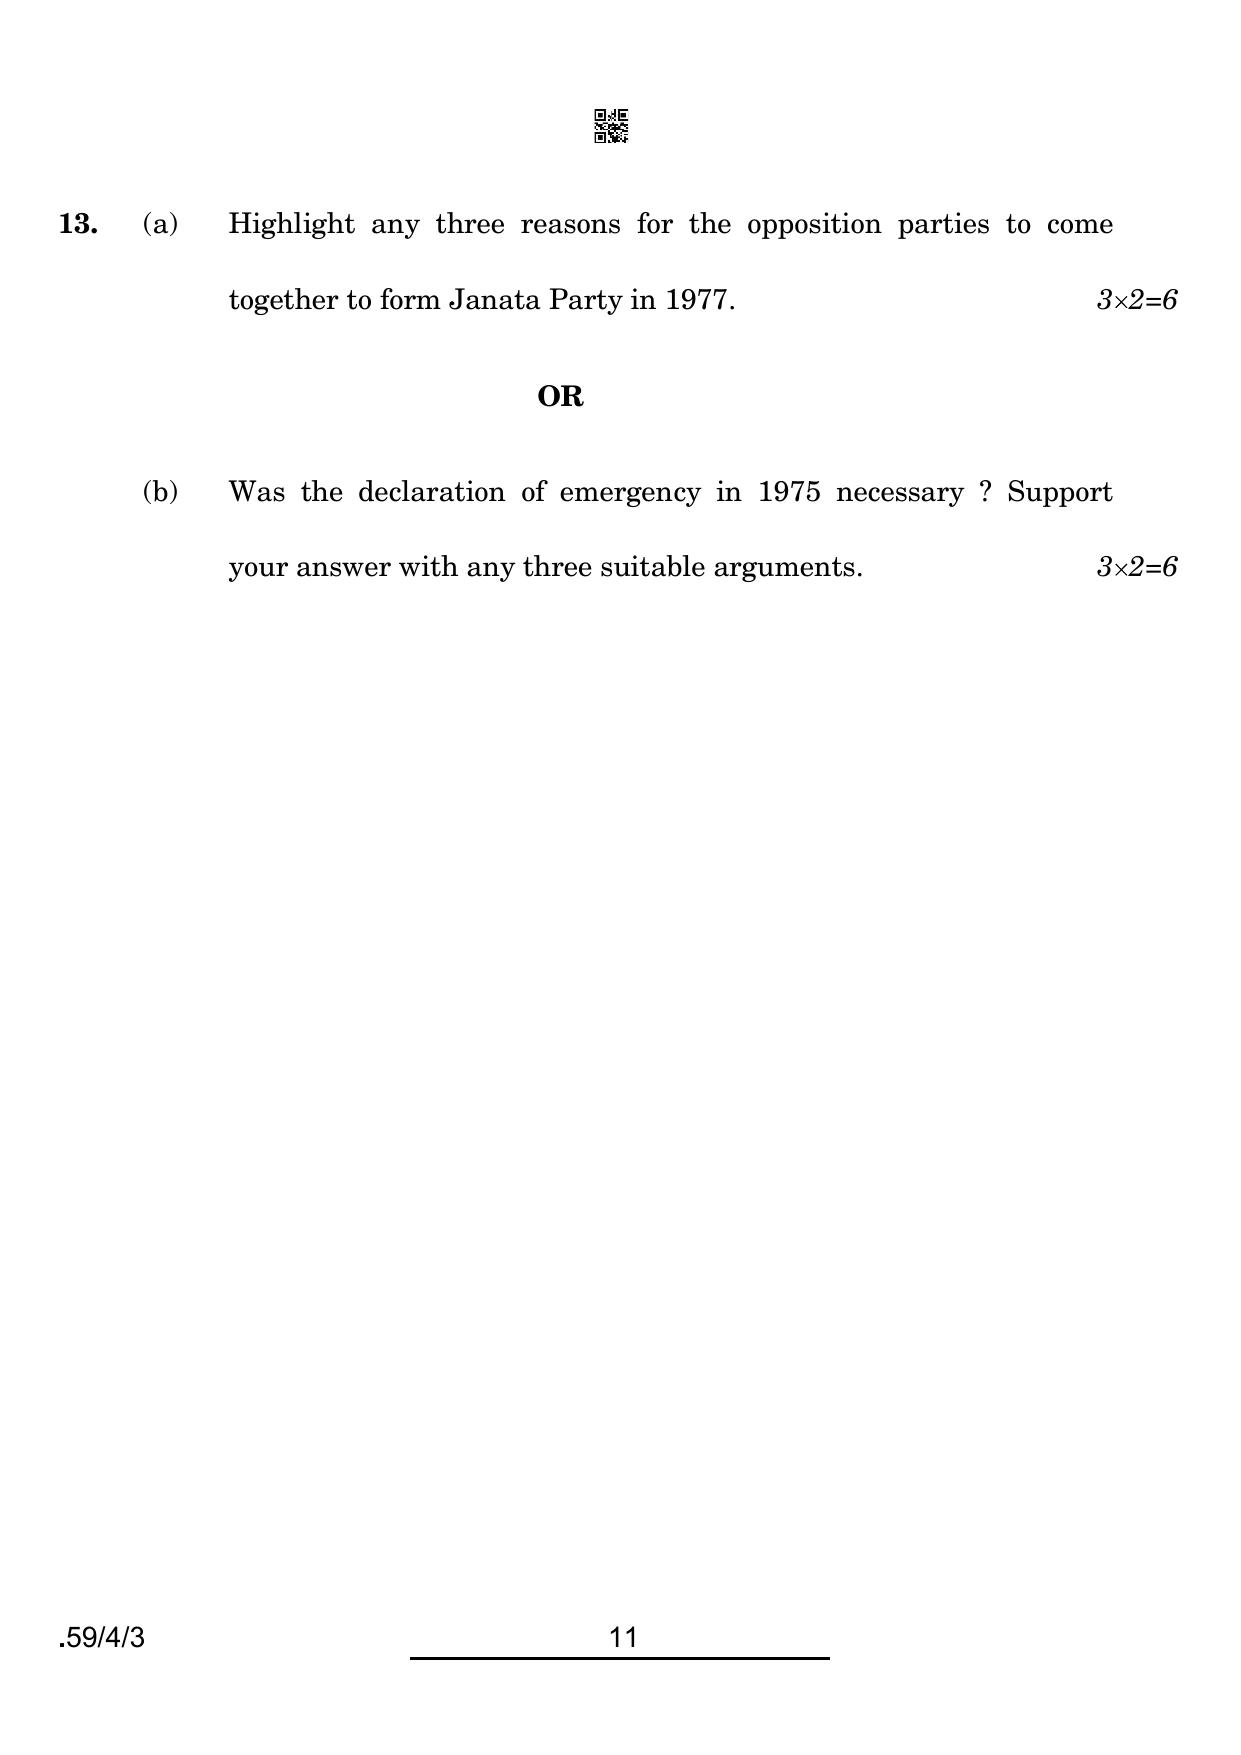 CBSE Class 12 59-4-3 Political Science 2022 Question Paper - Page 11